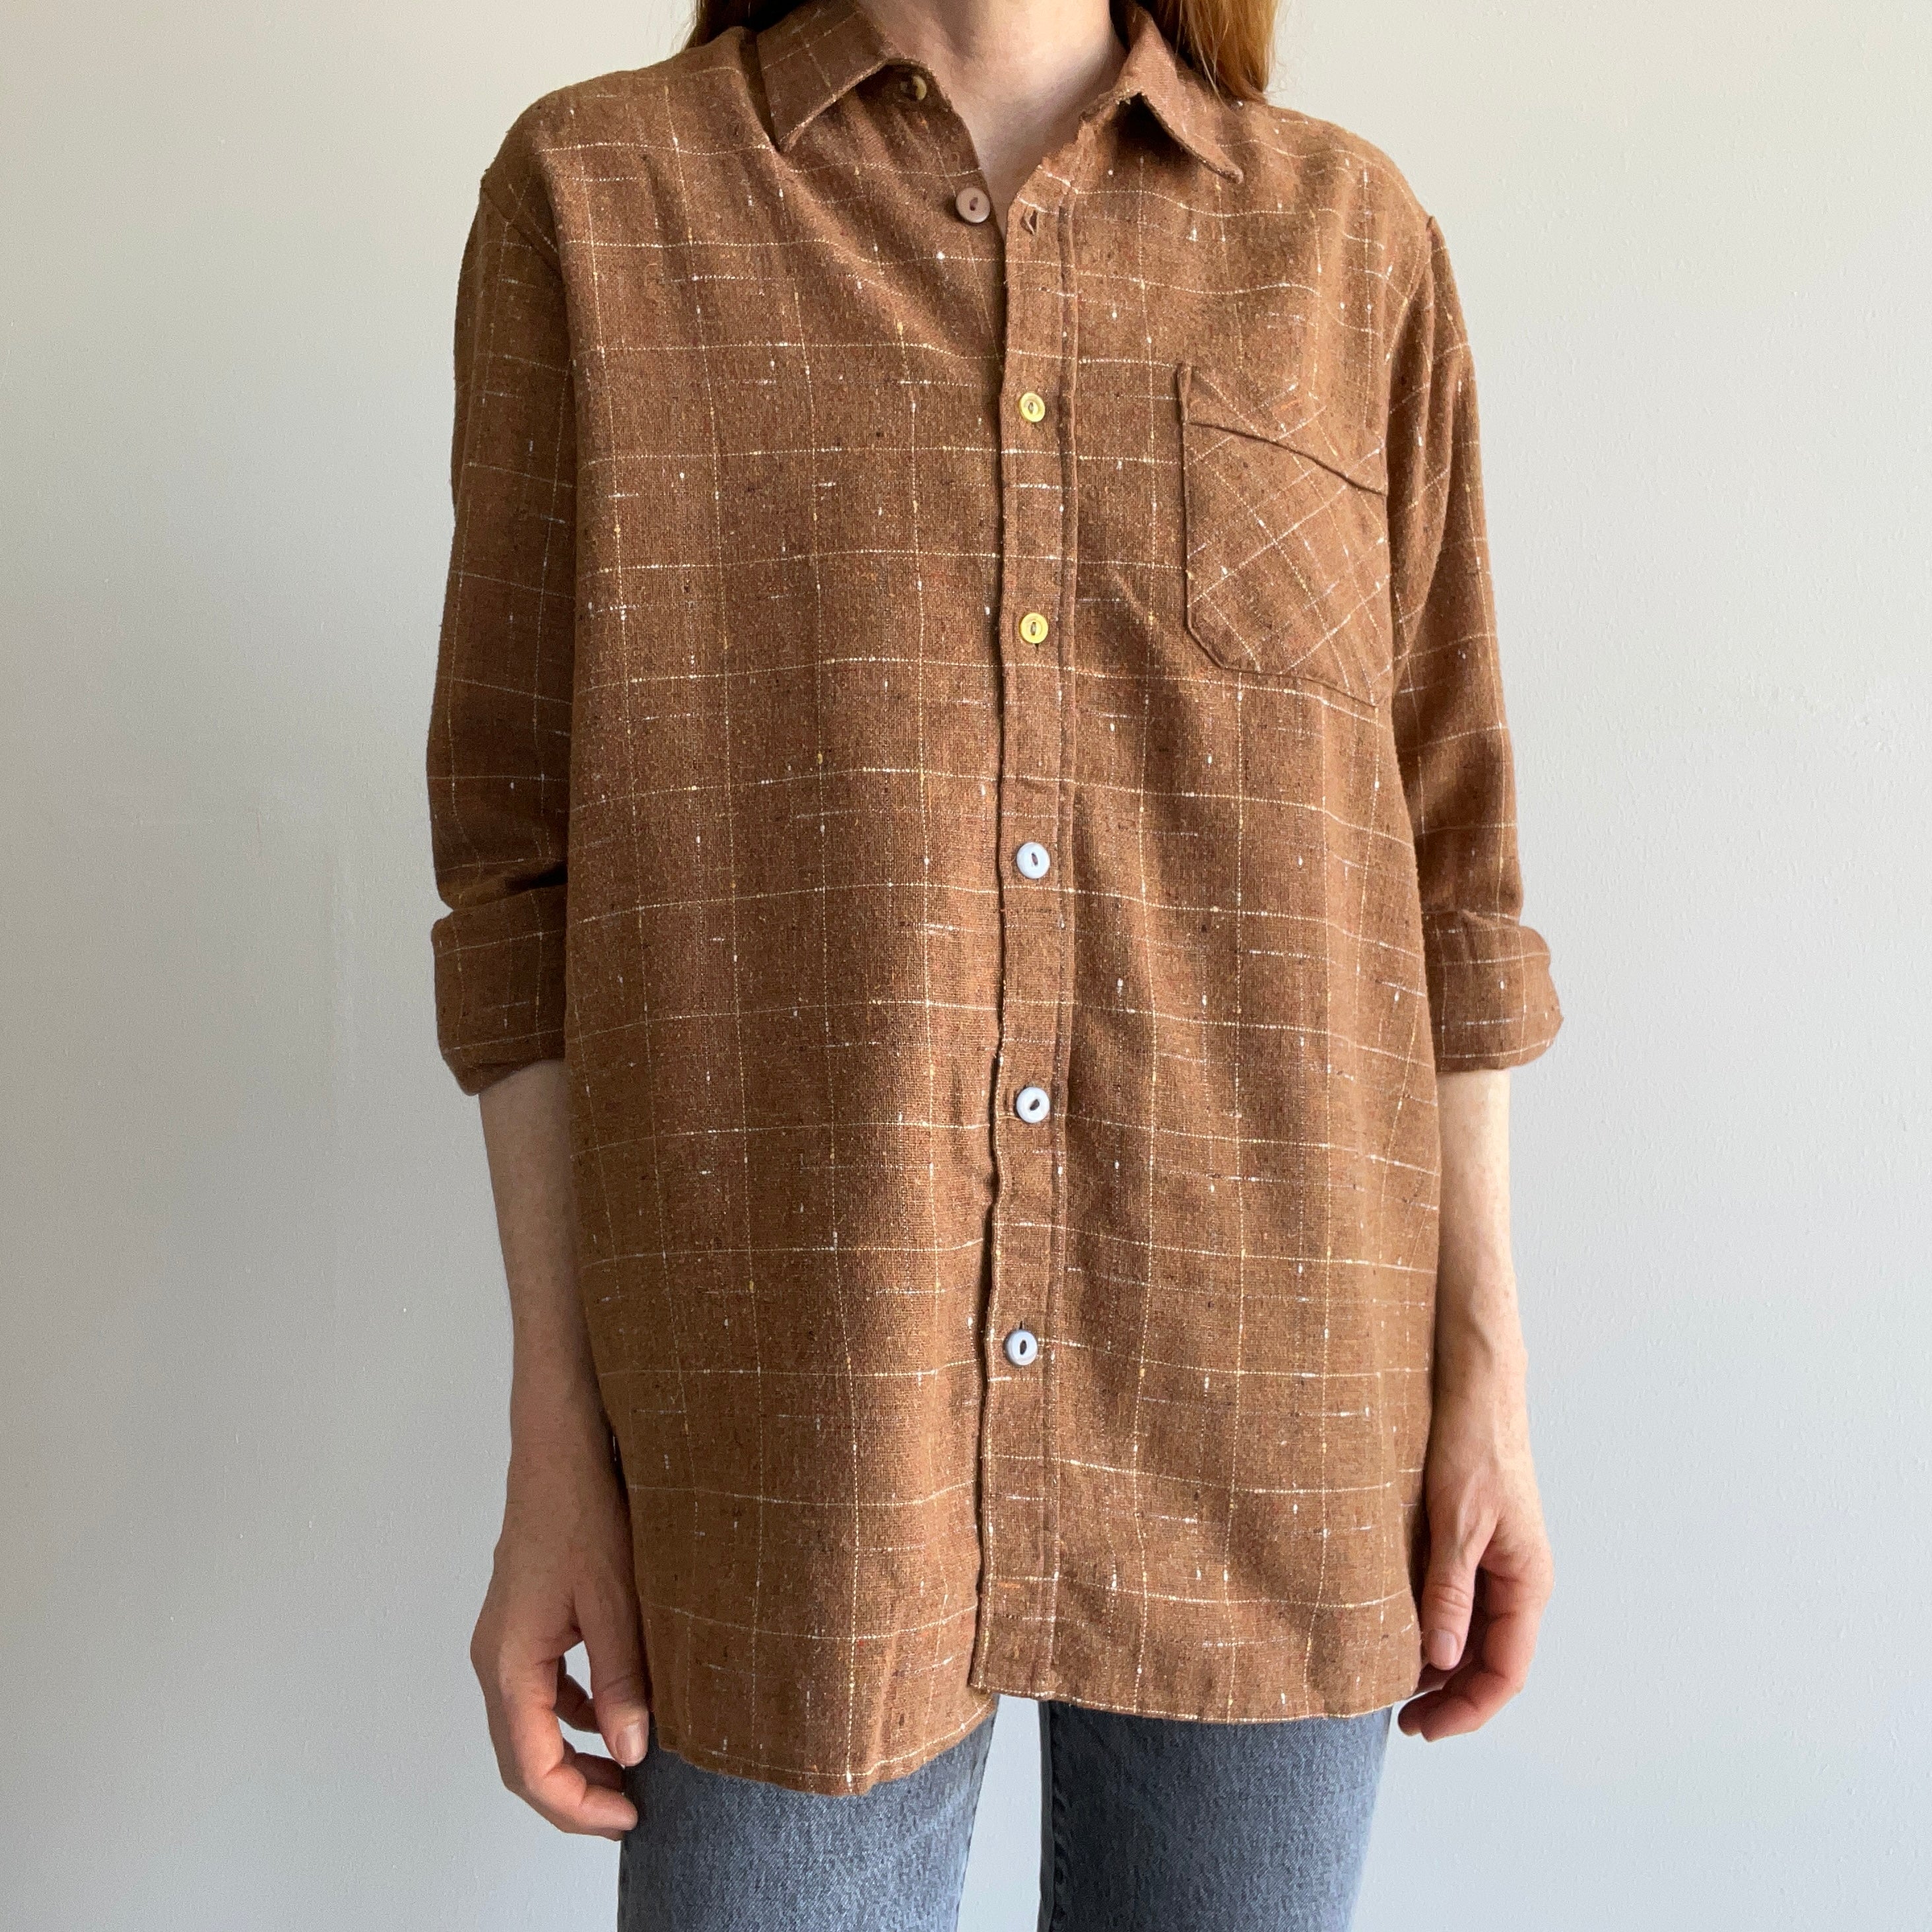 198/90s European Poly Blend Flannel with Mismatched Buttons